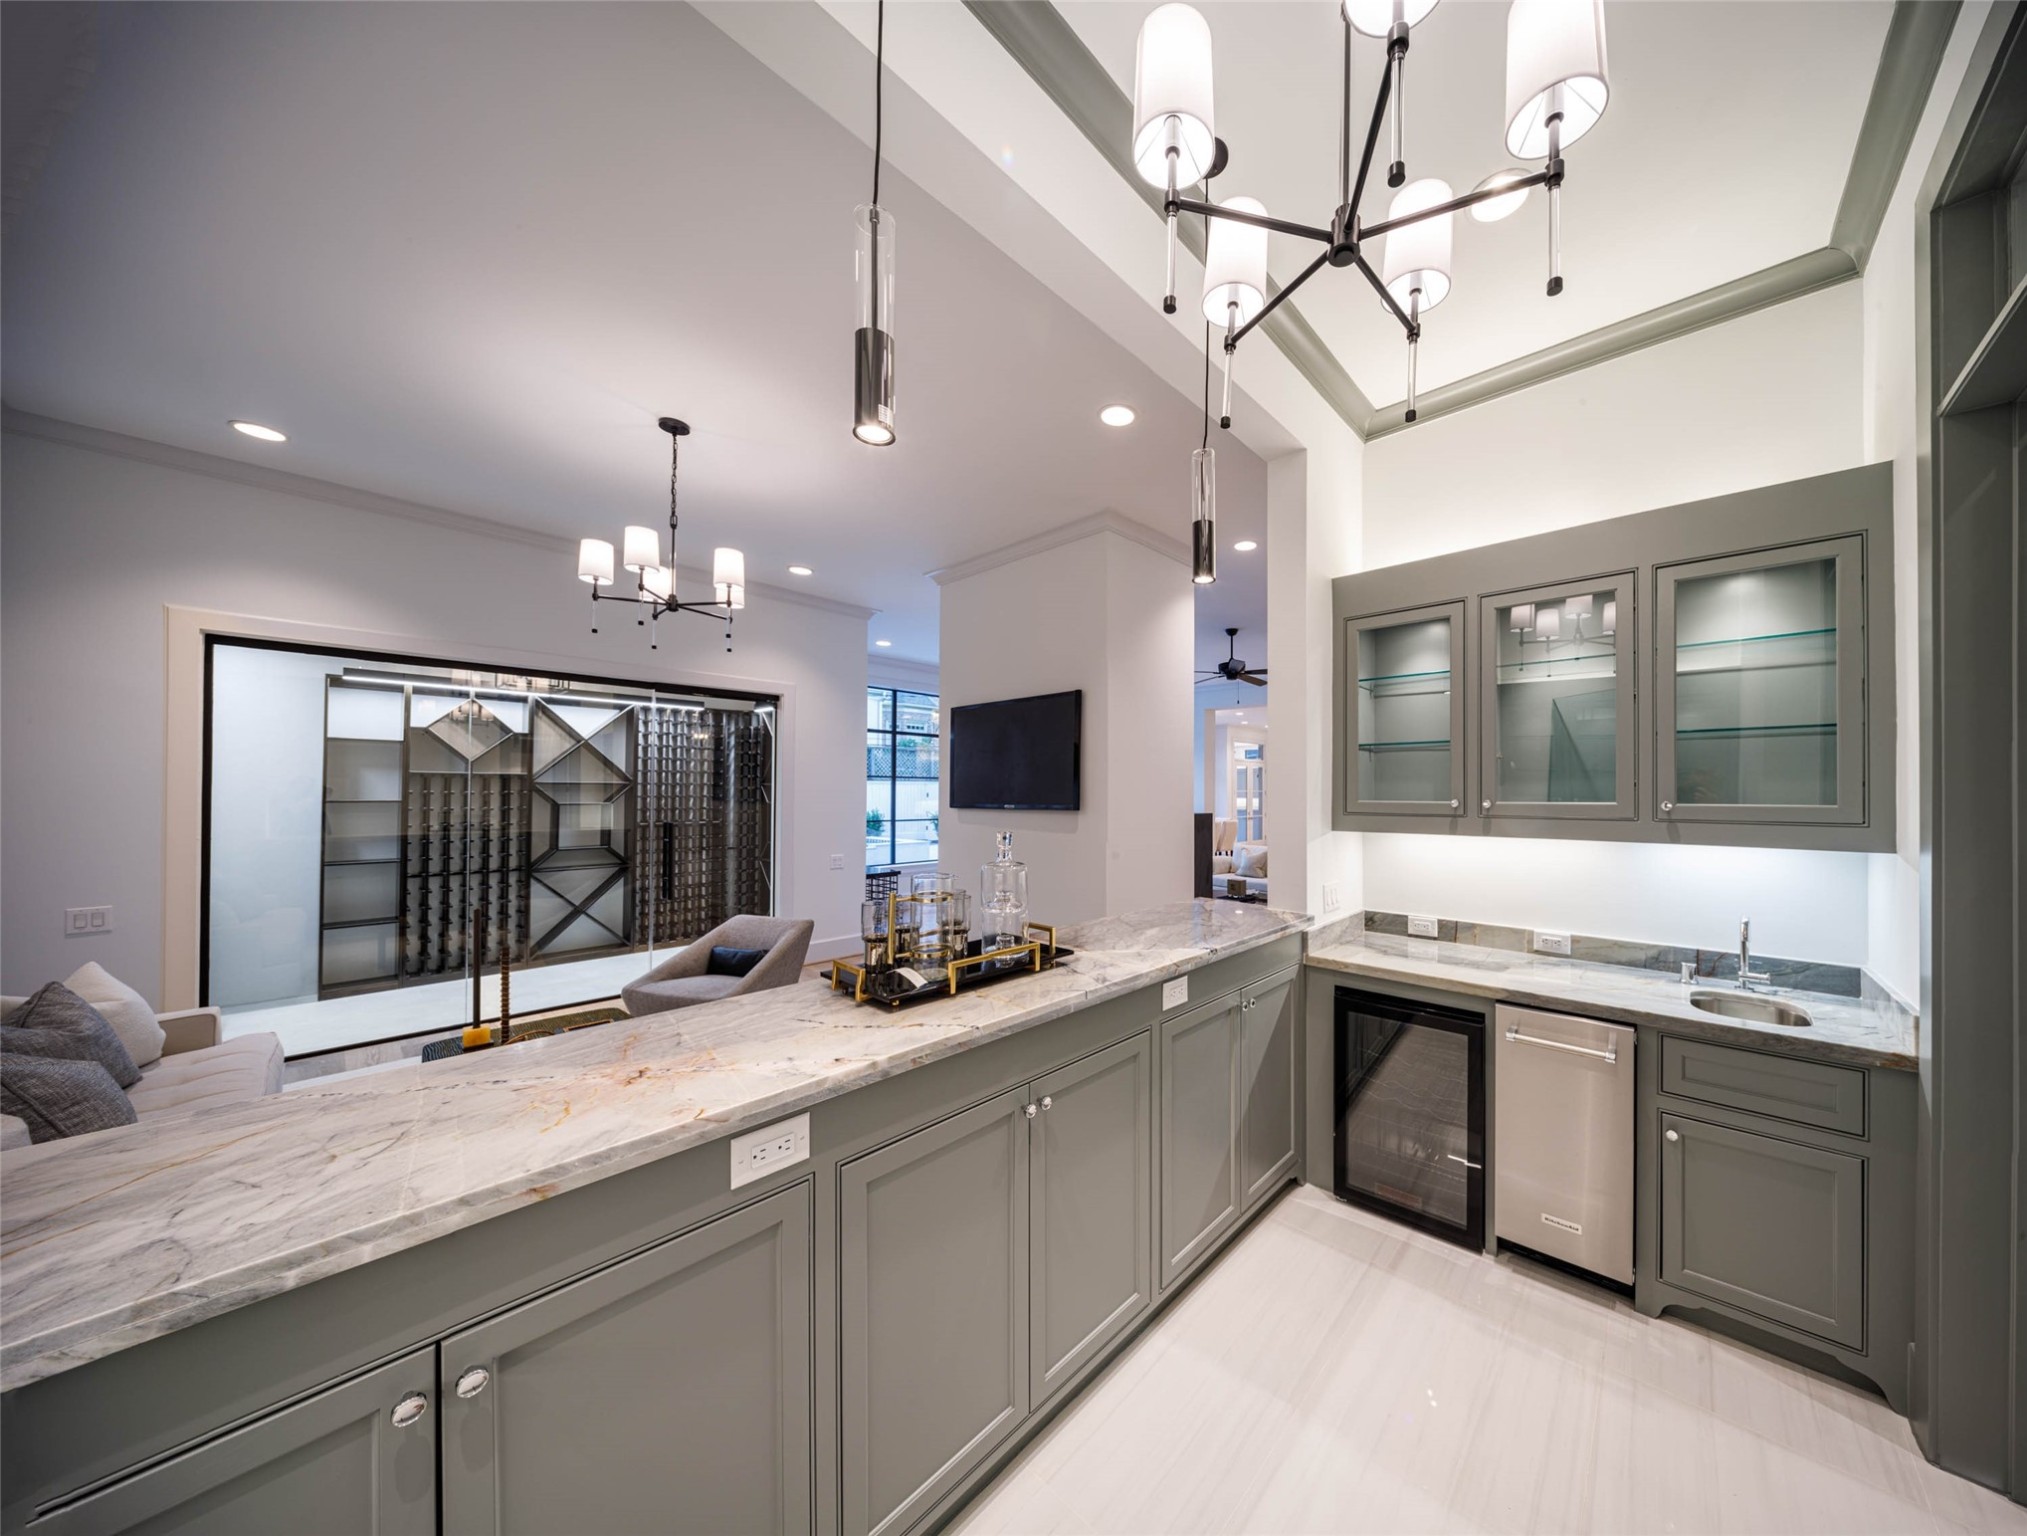 Spacious wet bar with built-in beverage and wine refrigerator, ice maker, sink, glass front cabinetry, designer chandelier and hanging pendants and above and under cabinet lighting